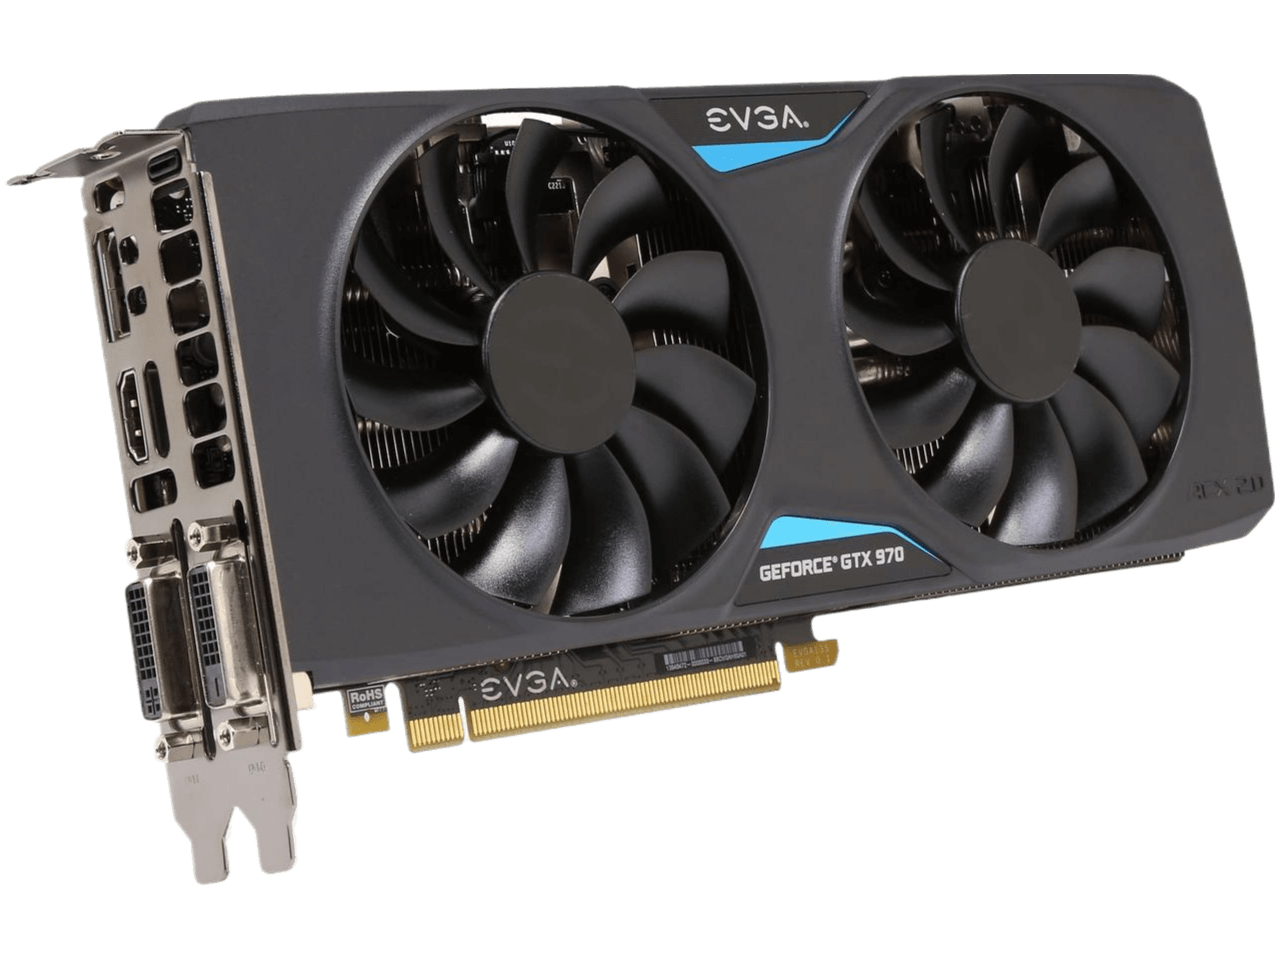 EVGA GeForce GTX 970 4GB SSC GAMING w/ACX 2.0+ Whisper Silent Cooling Graphics Card 04G-P4-3975-KR